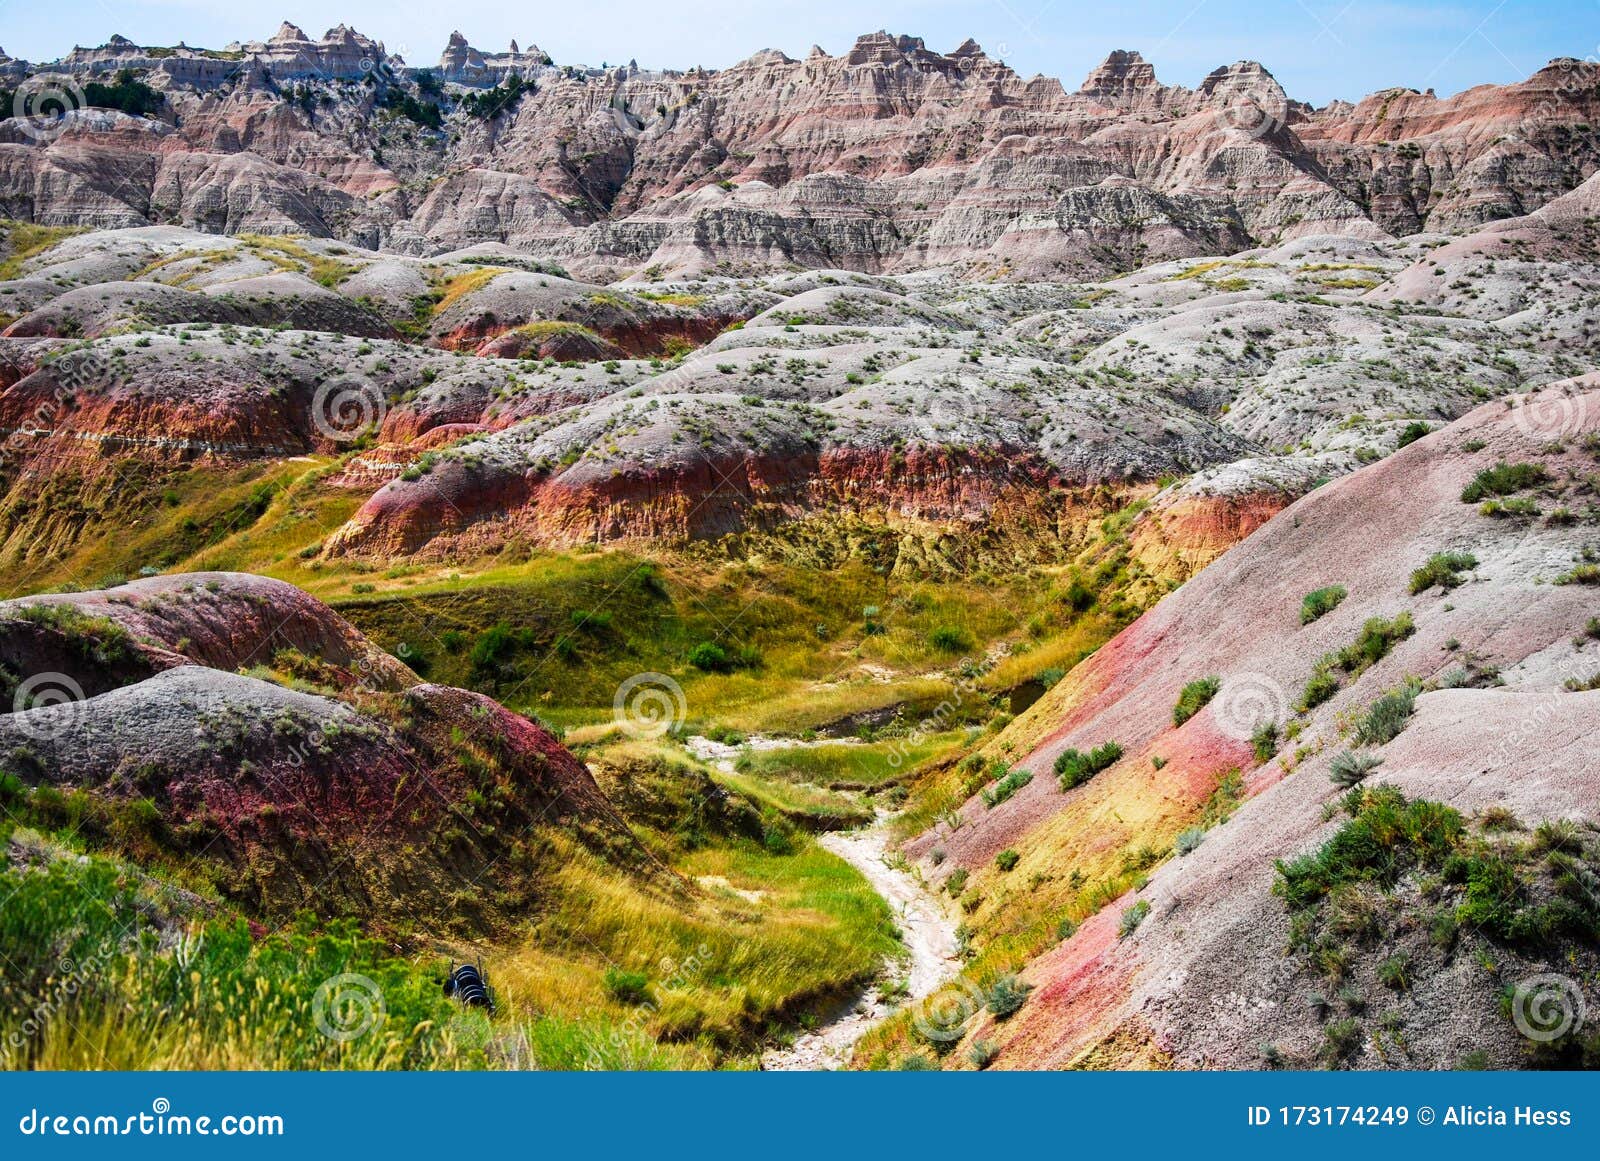 colorful rock formations of the badlands national park